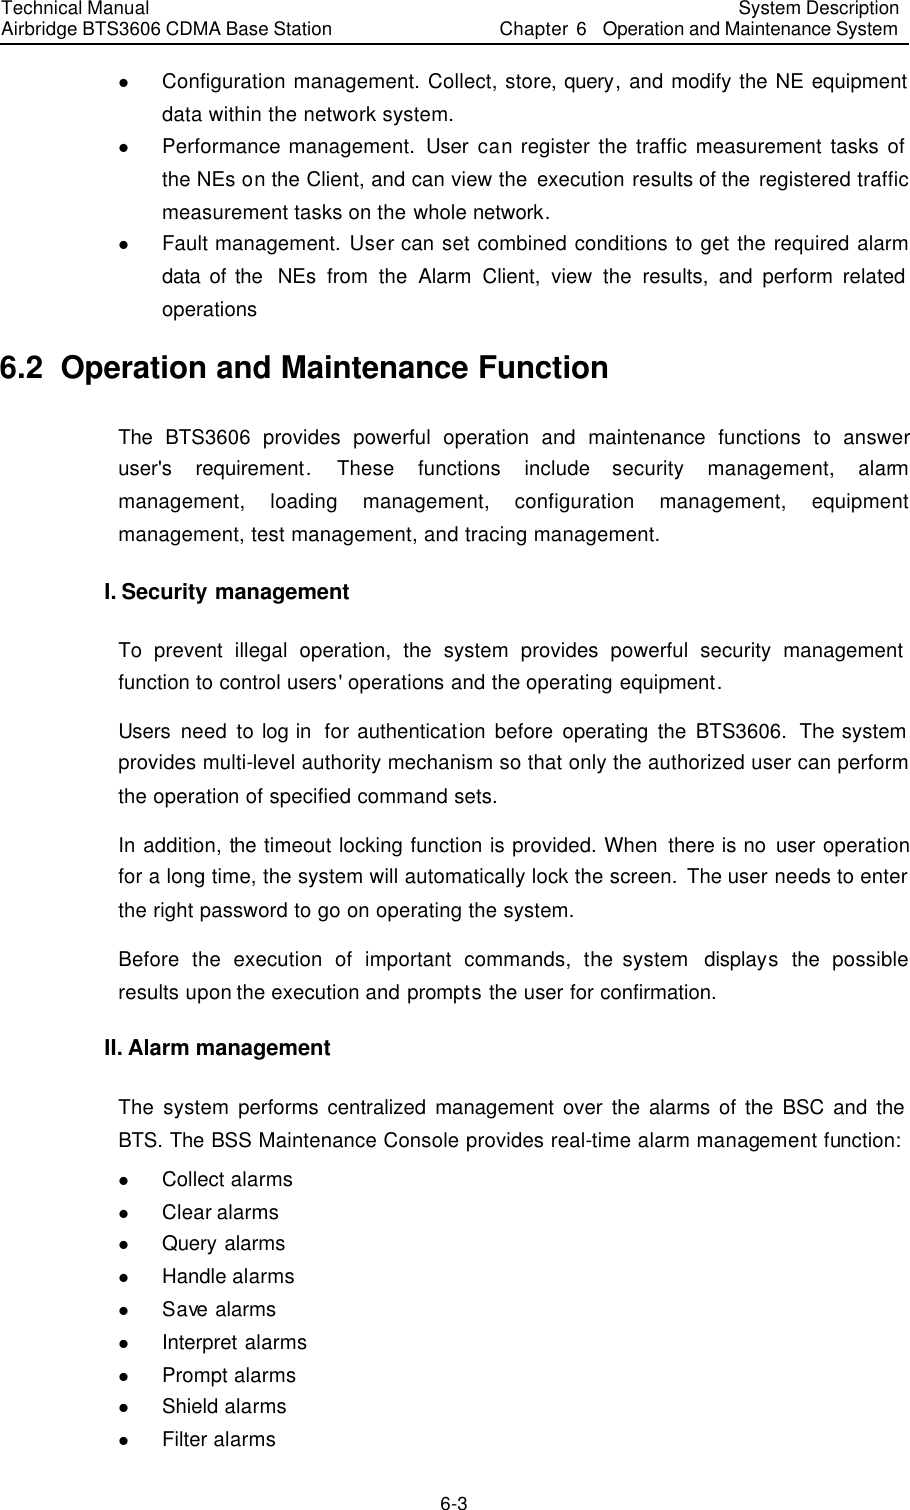 Technical Manual Airbridge BTS3606 CDMA Base Station System Description Chapter 6  Operation and Maintenance System   6-3 l Configuration management. Collect, store, query, and modify the NE equipment data within the network system. l Performance management.  User can register the traffic measurement tasks of the NEs on the Client, and can view the execution results of the registered traffic measurement tasks on the whole network. l Fault management. User can set combined conditions to get the required alarm data of the  NEs from the Alarm Client, view the results, and perform related operations 6.2  Operation and Maintenance Function The  BTS3606 provides powerful operation and maintenance functions to  answer user&apos;s requirement. These functions include security management, alarm management, loading management, configuration management, equipment management, test management, and tracing management. I. Security management To prevent illegal operation, the system provides powerful security management function to control users&apos; operations and the operating equipment. Users need to log in  for authentication before operating the BTS3606. The system provides multi-level authority mechanism so that only the authorized user can perform the operation of specified command sets.   In addition, the timeout locking function is provided. When there is no user operation for a long time, the system will automatically lock the screen. The user needs to enter the right password to go on operating the system. Before the execution of important commands, the system  displays the possible results upon the execution and prompts the user for confirmation. II. Alarm management The system performs centralized management over the alarms of the BSC and the BTS. The BSS Maintenance Console provides real-time alarm management function:   l Collect alarms l Clear alarms l Query alarms l Handle alarms l Save  alarms l Interpret alarms l Prompt alarms l Shield alarms l Filter alarms 